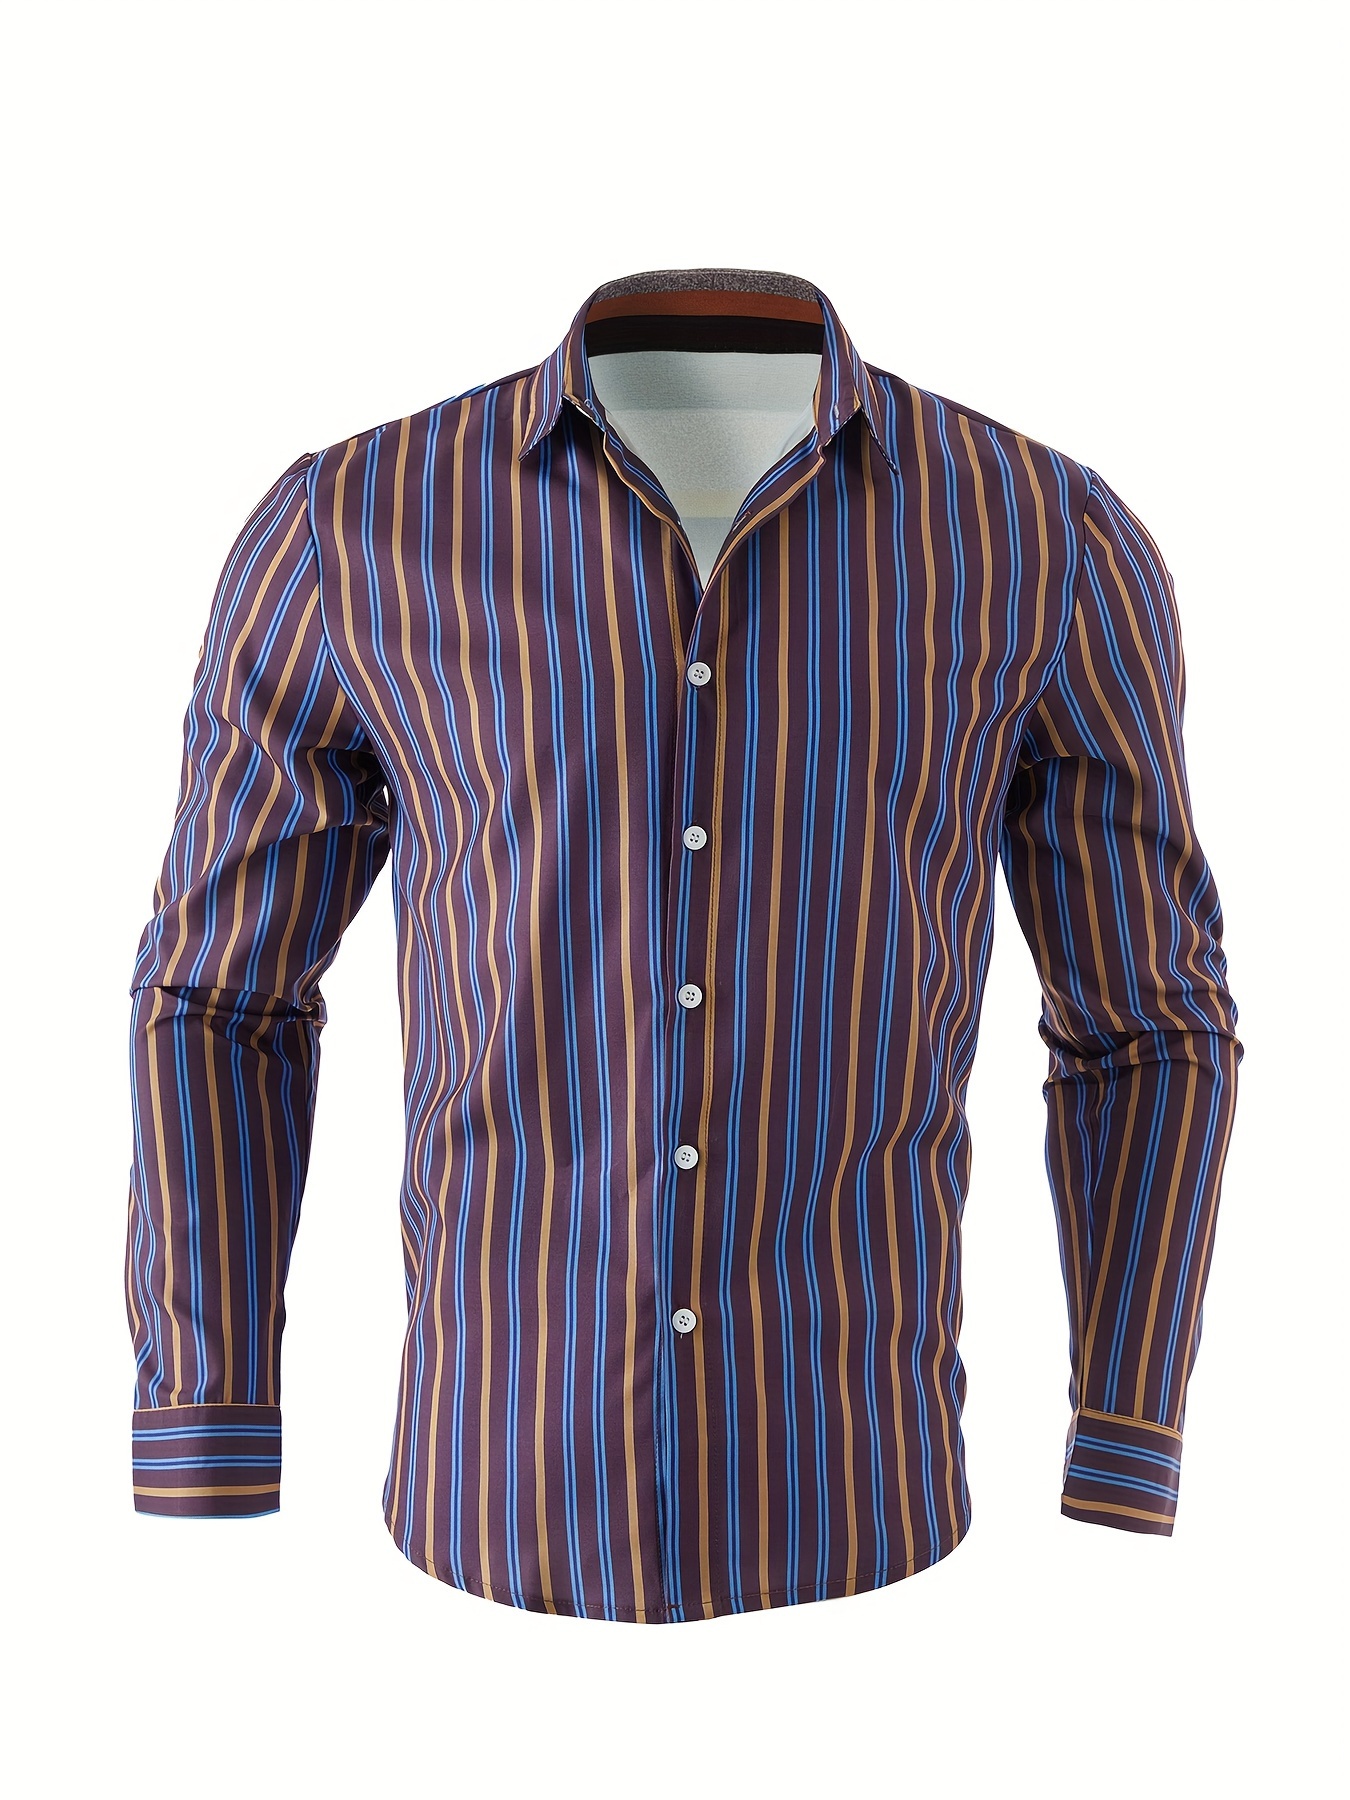 mens classic design striped long sleeve button up shirt for business occasions spring fall mens clothing details 5